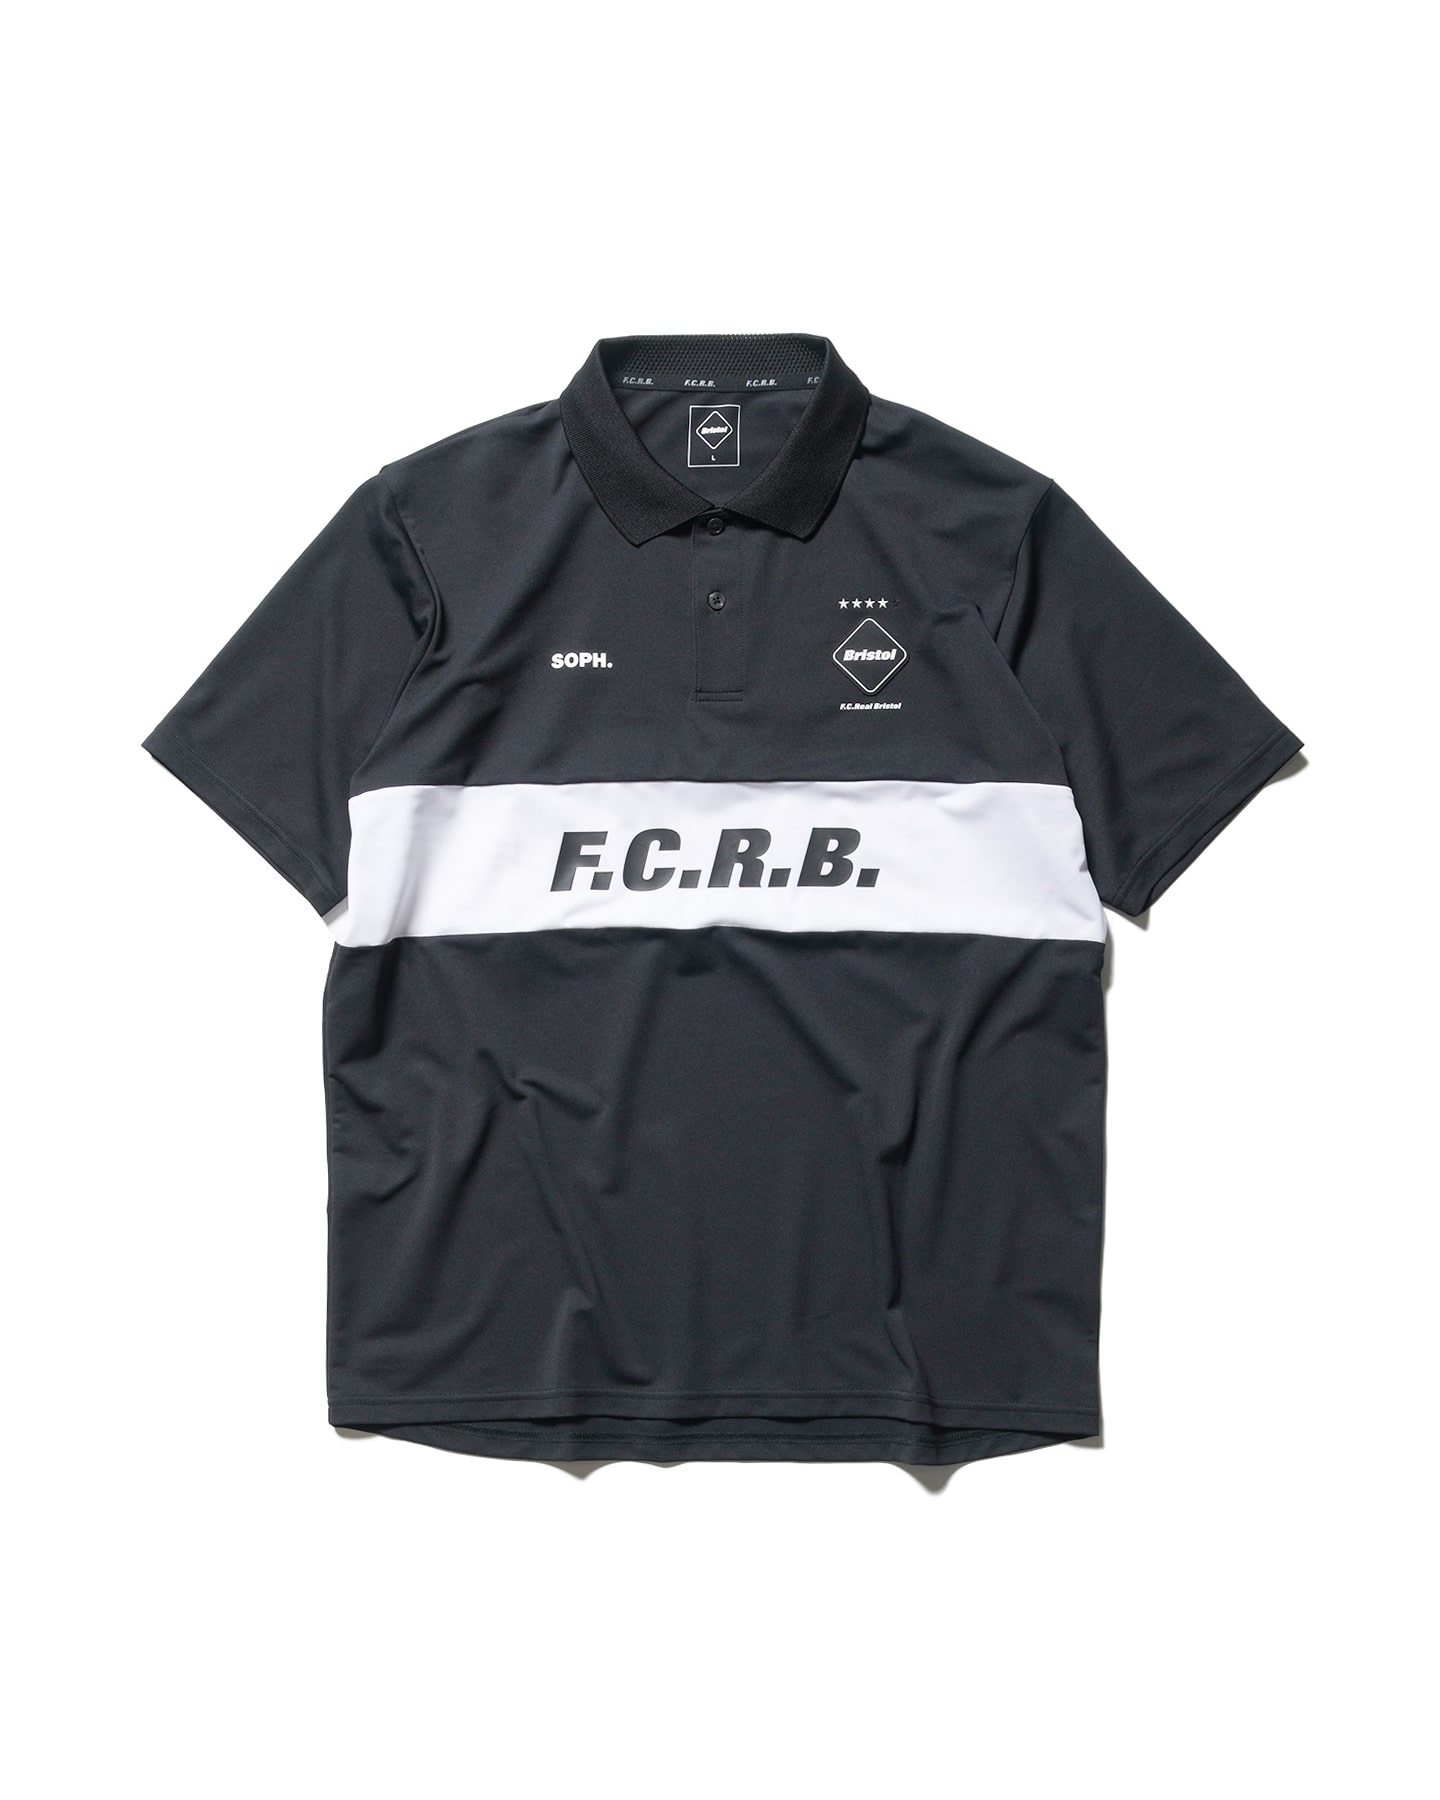 FCRB  S/S TEAM POLO   ポロシャツ